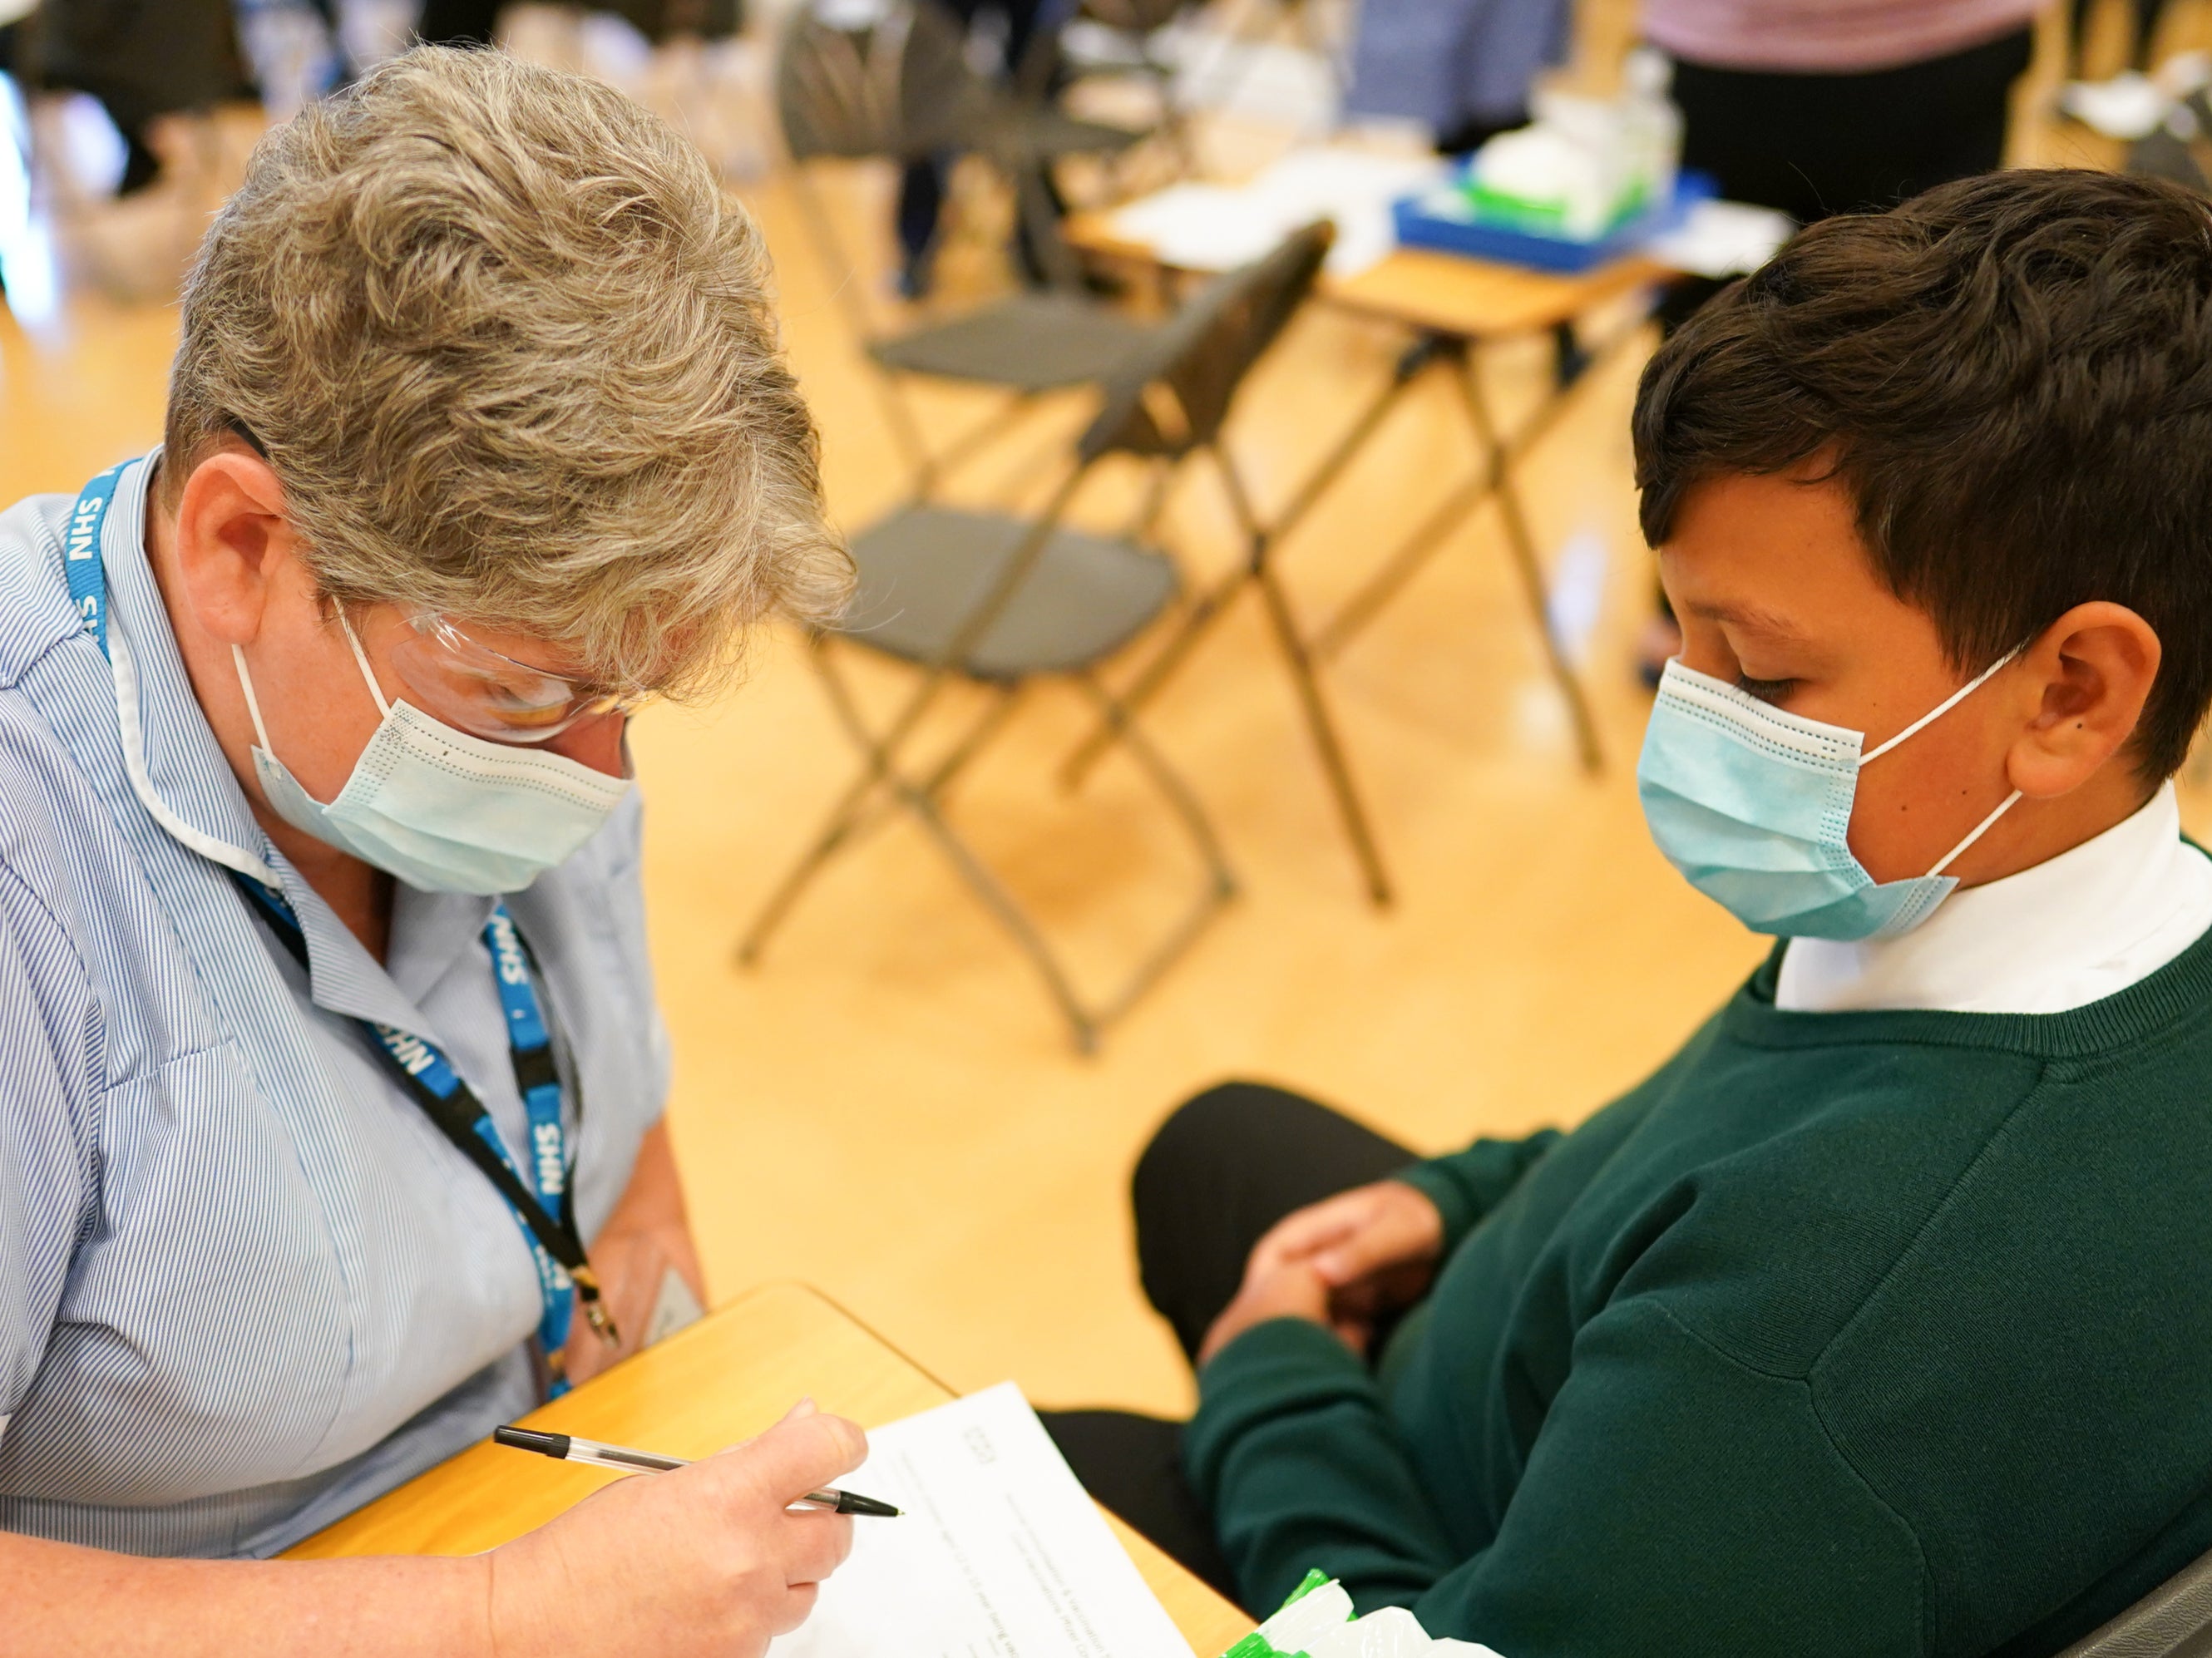 A 13-year-old from Newcastle speaks with a nurse on Wednesday before he receives the Pfizer Covid vaccine